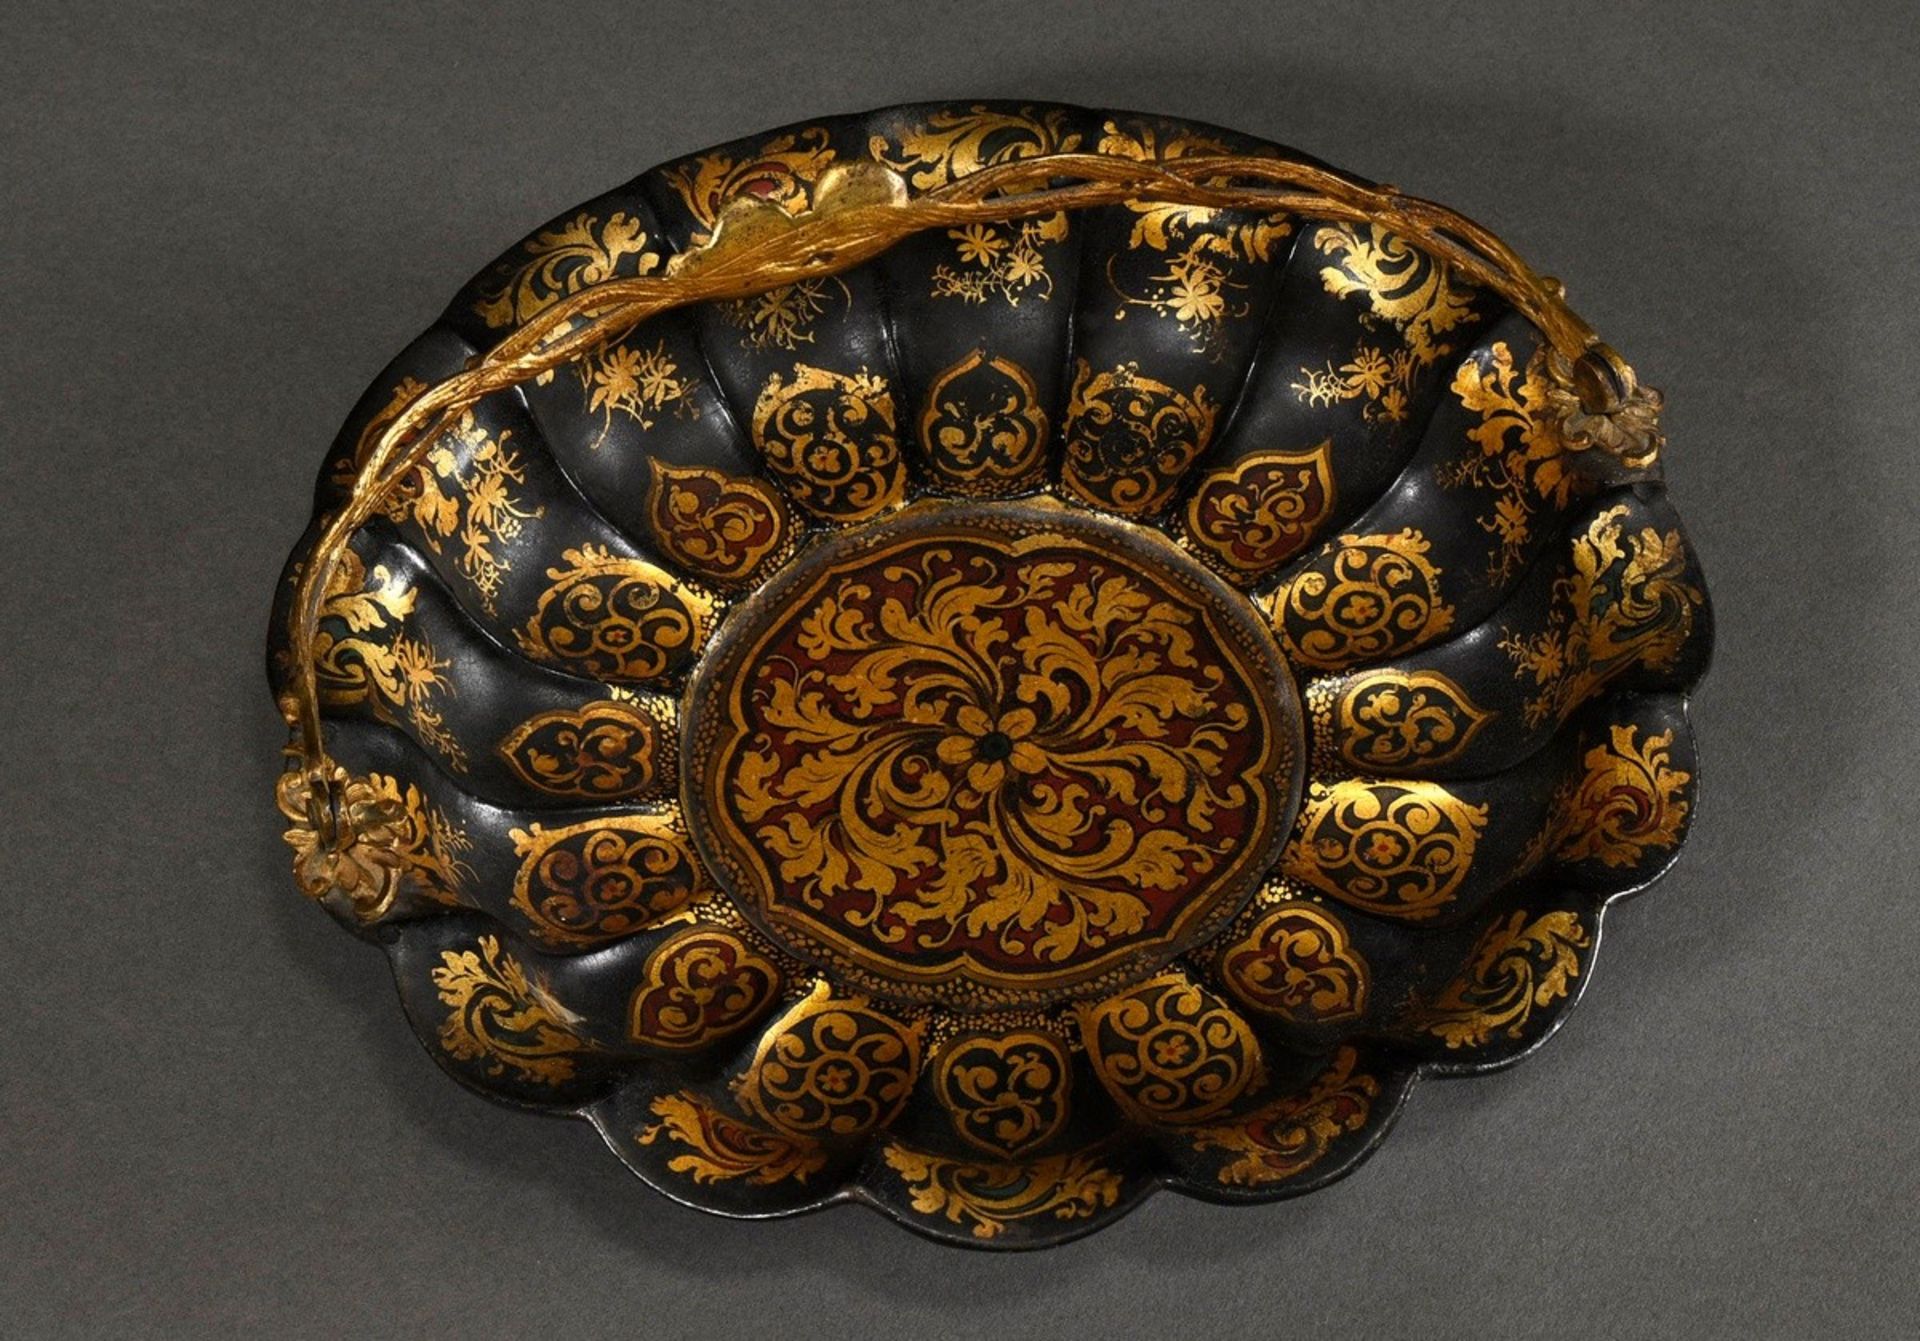 Flower-shaped papier-mâché bowl with a vegetal metal handle and floral gold painting on a red and g - Image 3 of 8